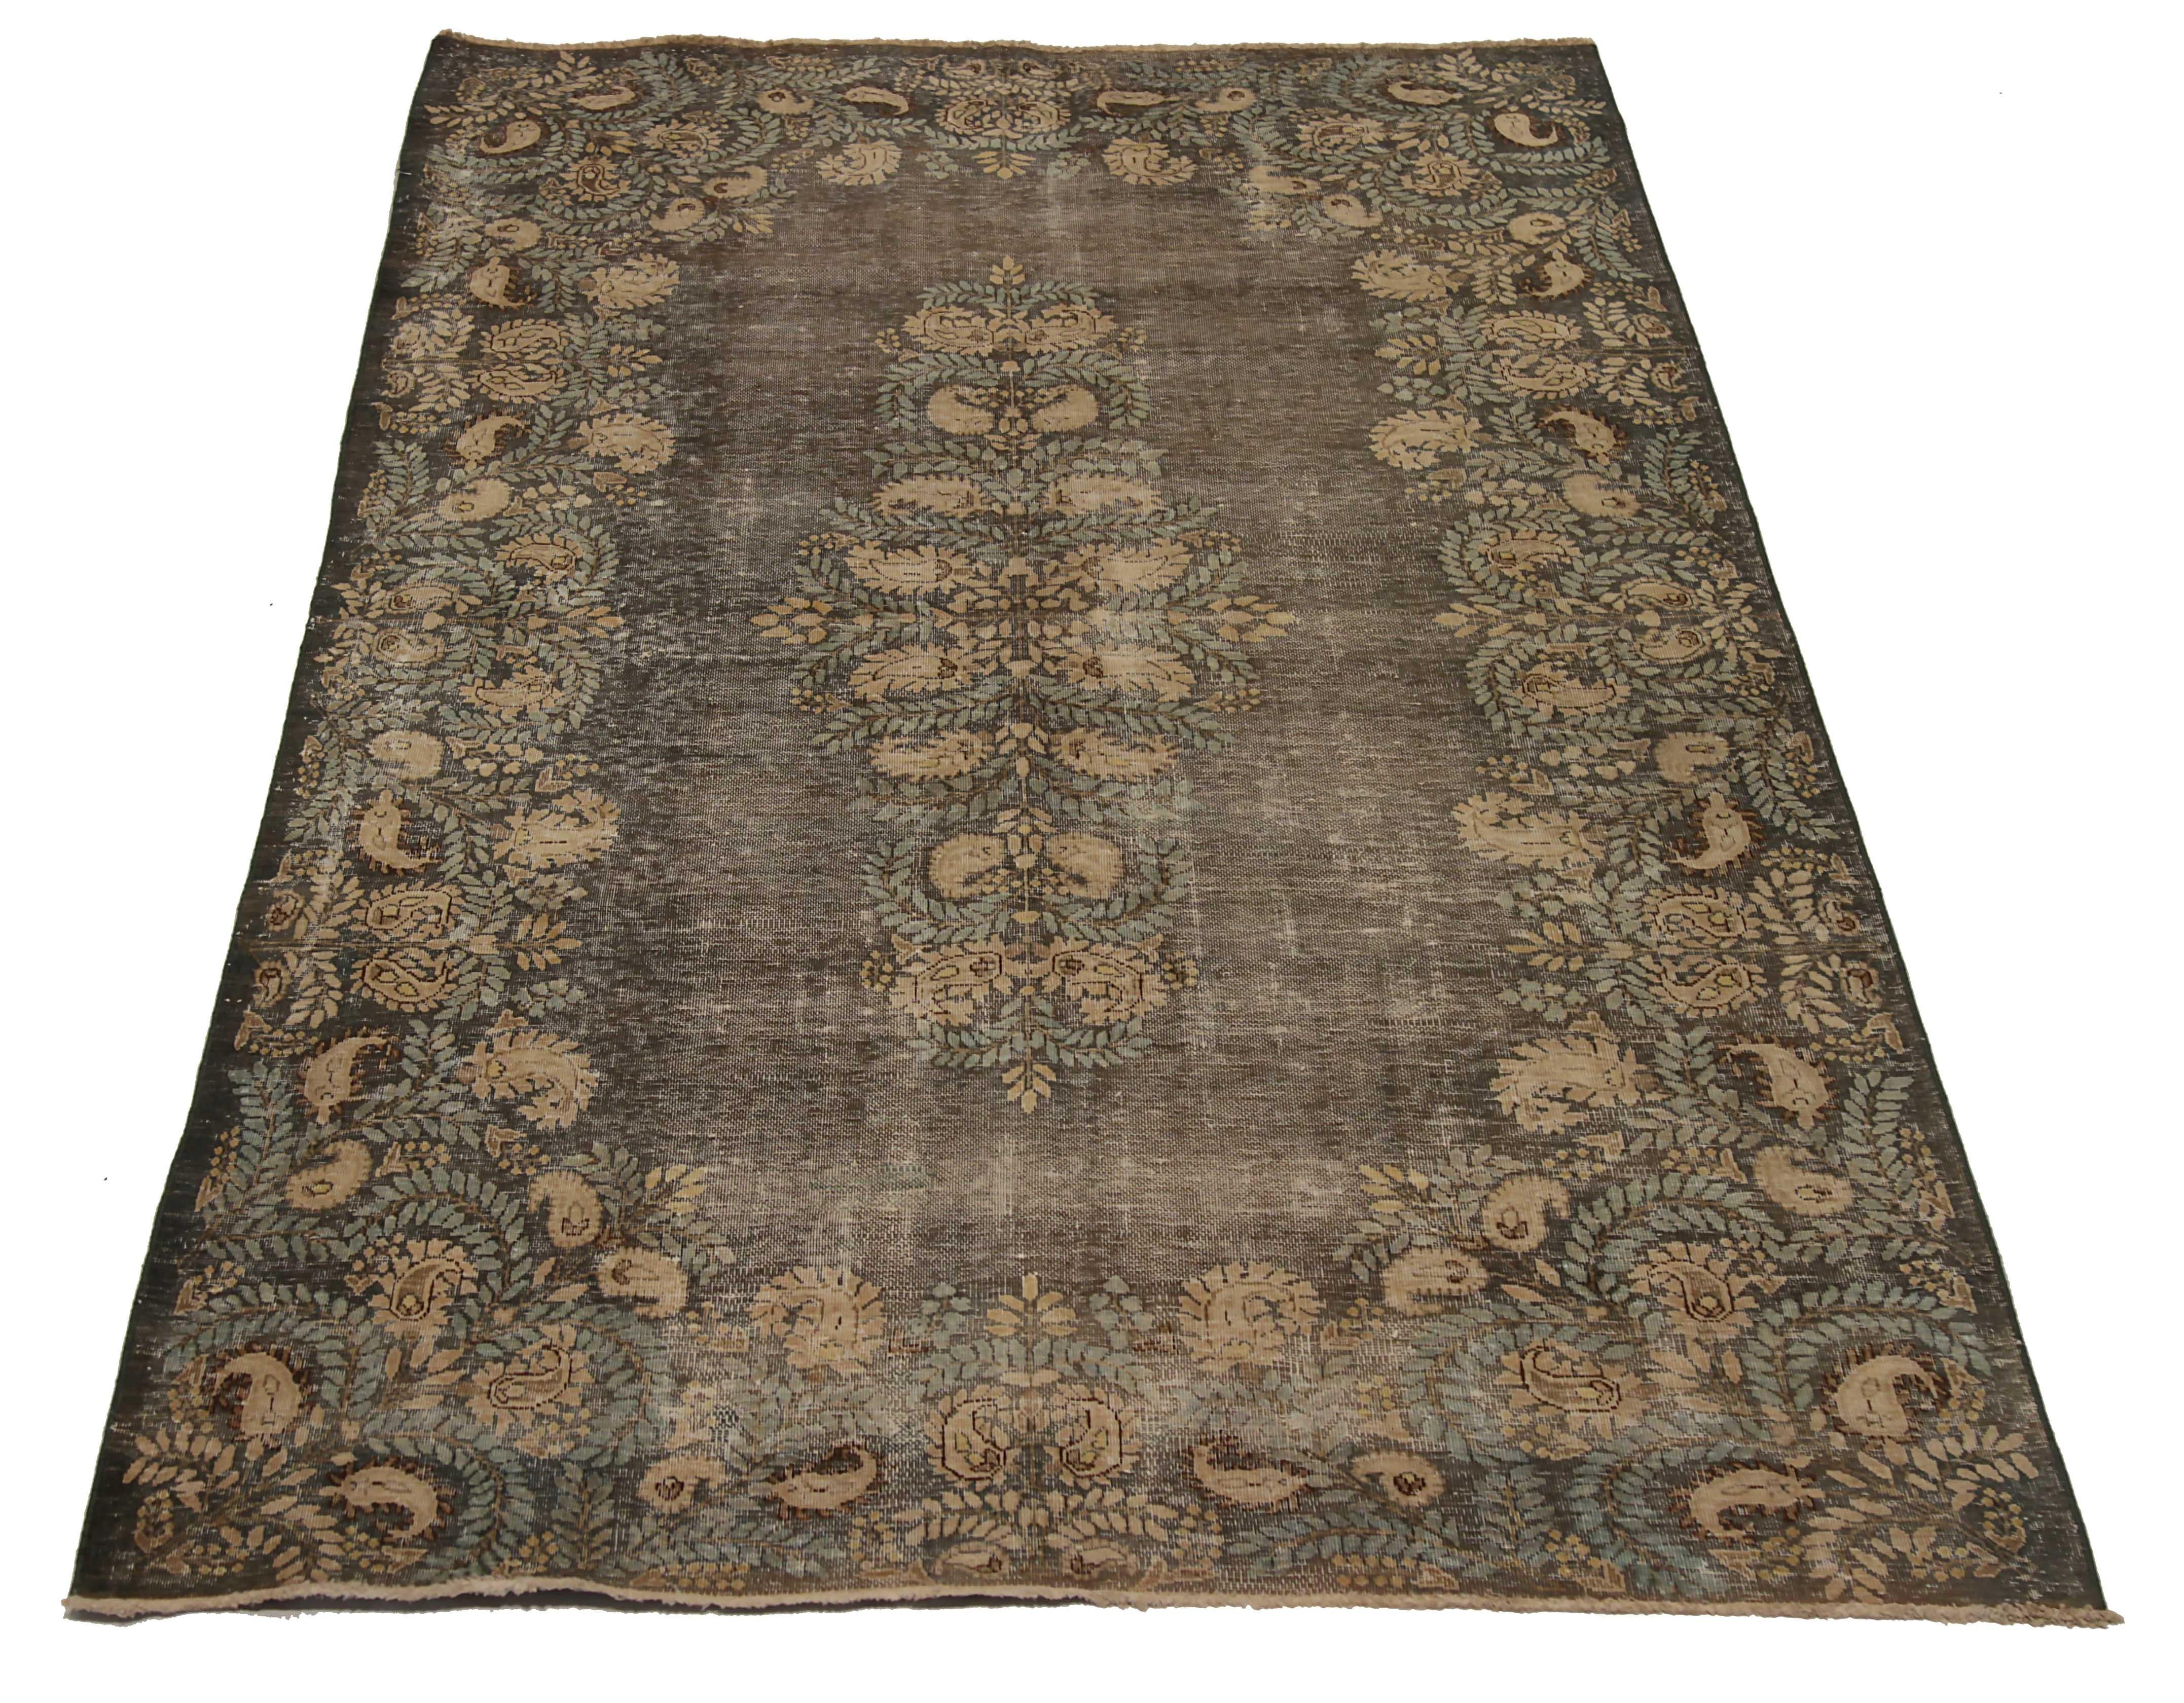 Antique Turkish area rug handwoven from the finest sheep’s wool. It’s colored with all-natural vegetable dyes that are safe for humans and pets. It’s a traditional Kerman design handwoven by expert artisans. It’s a lovely area rug that can be